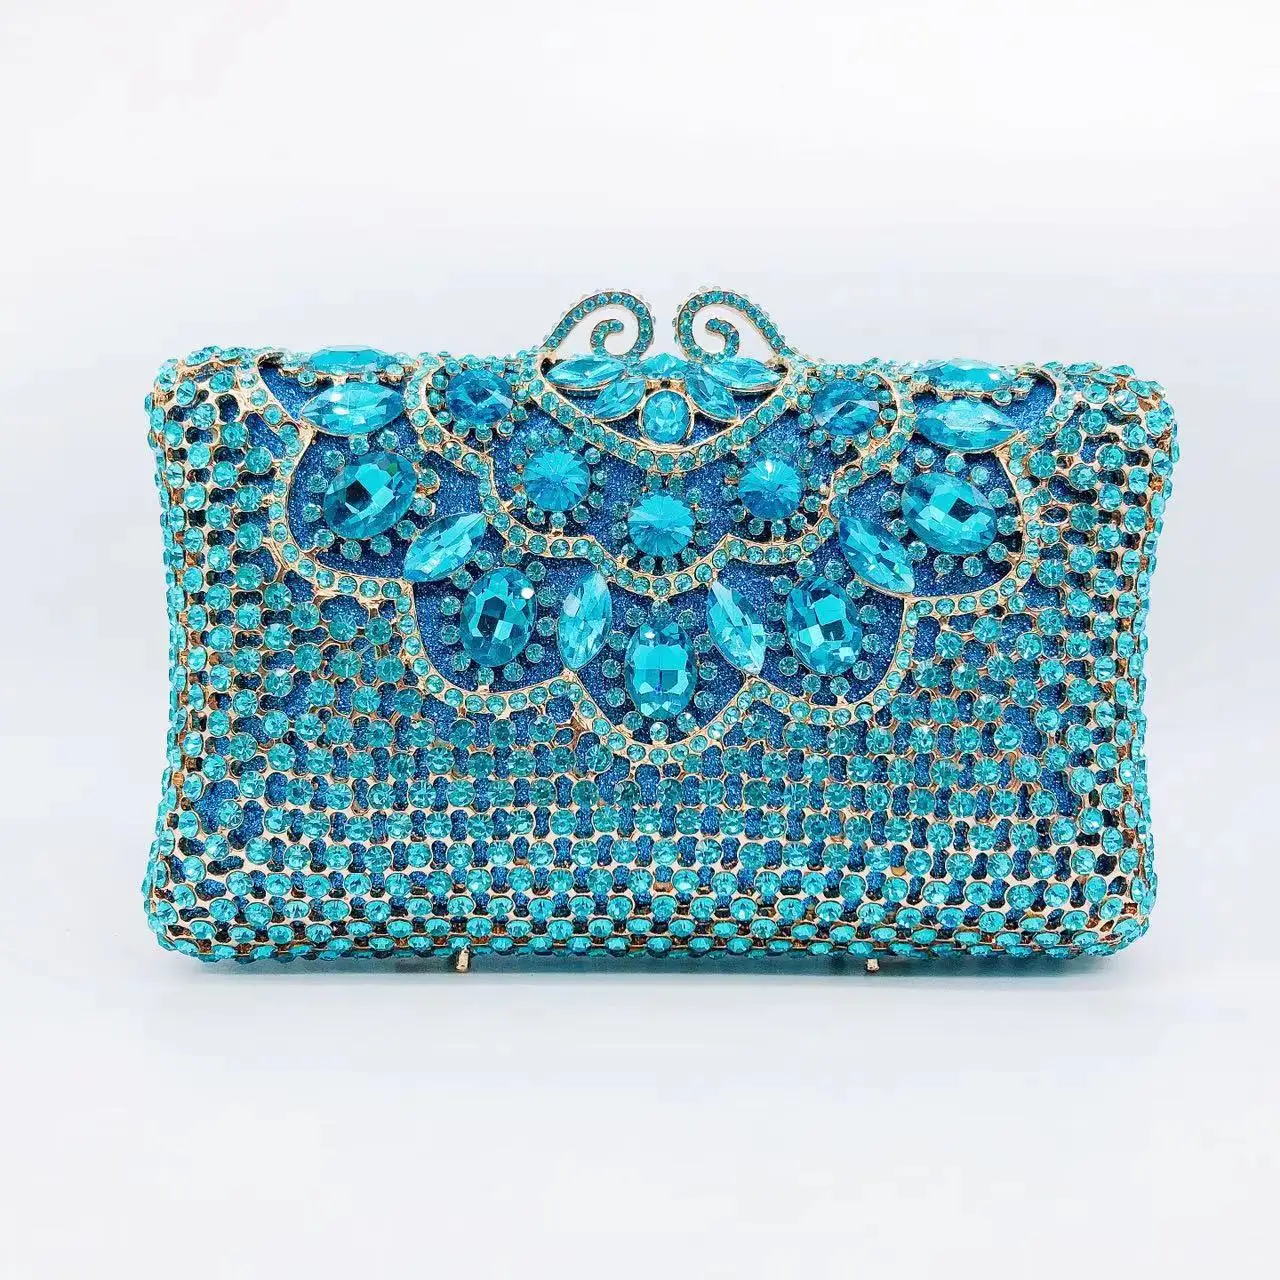 Amiqi MRY77 Beautiful Chain Diamond Rhinestone Evening Clutch Crystal Purse Bling Glitter Gold Bags For Evening Parties